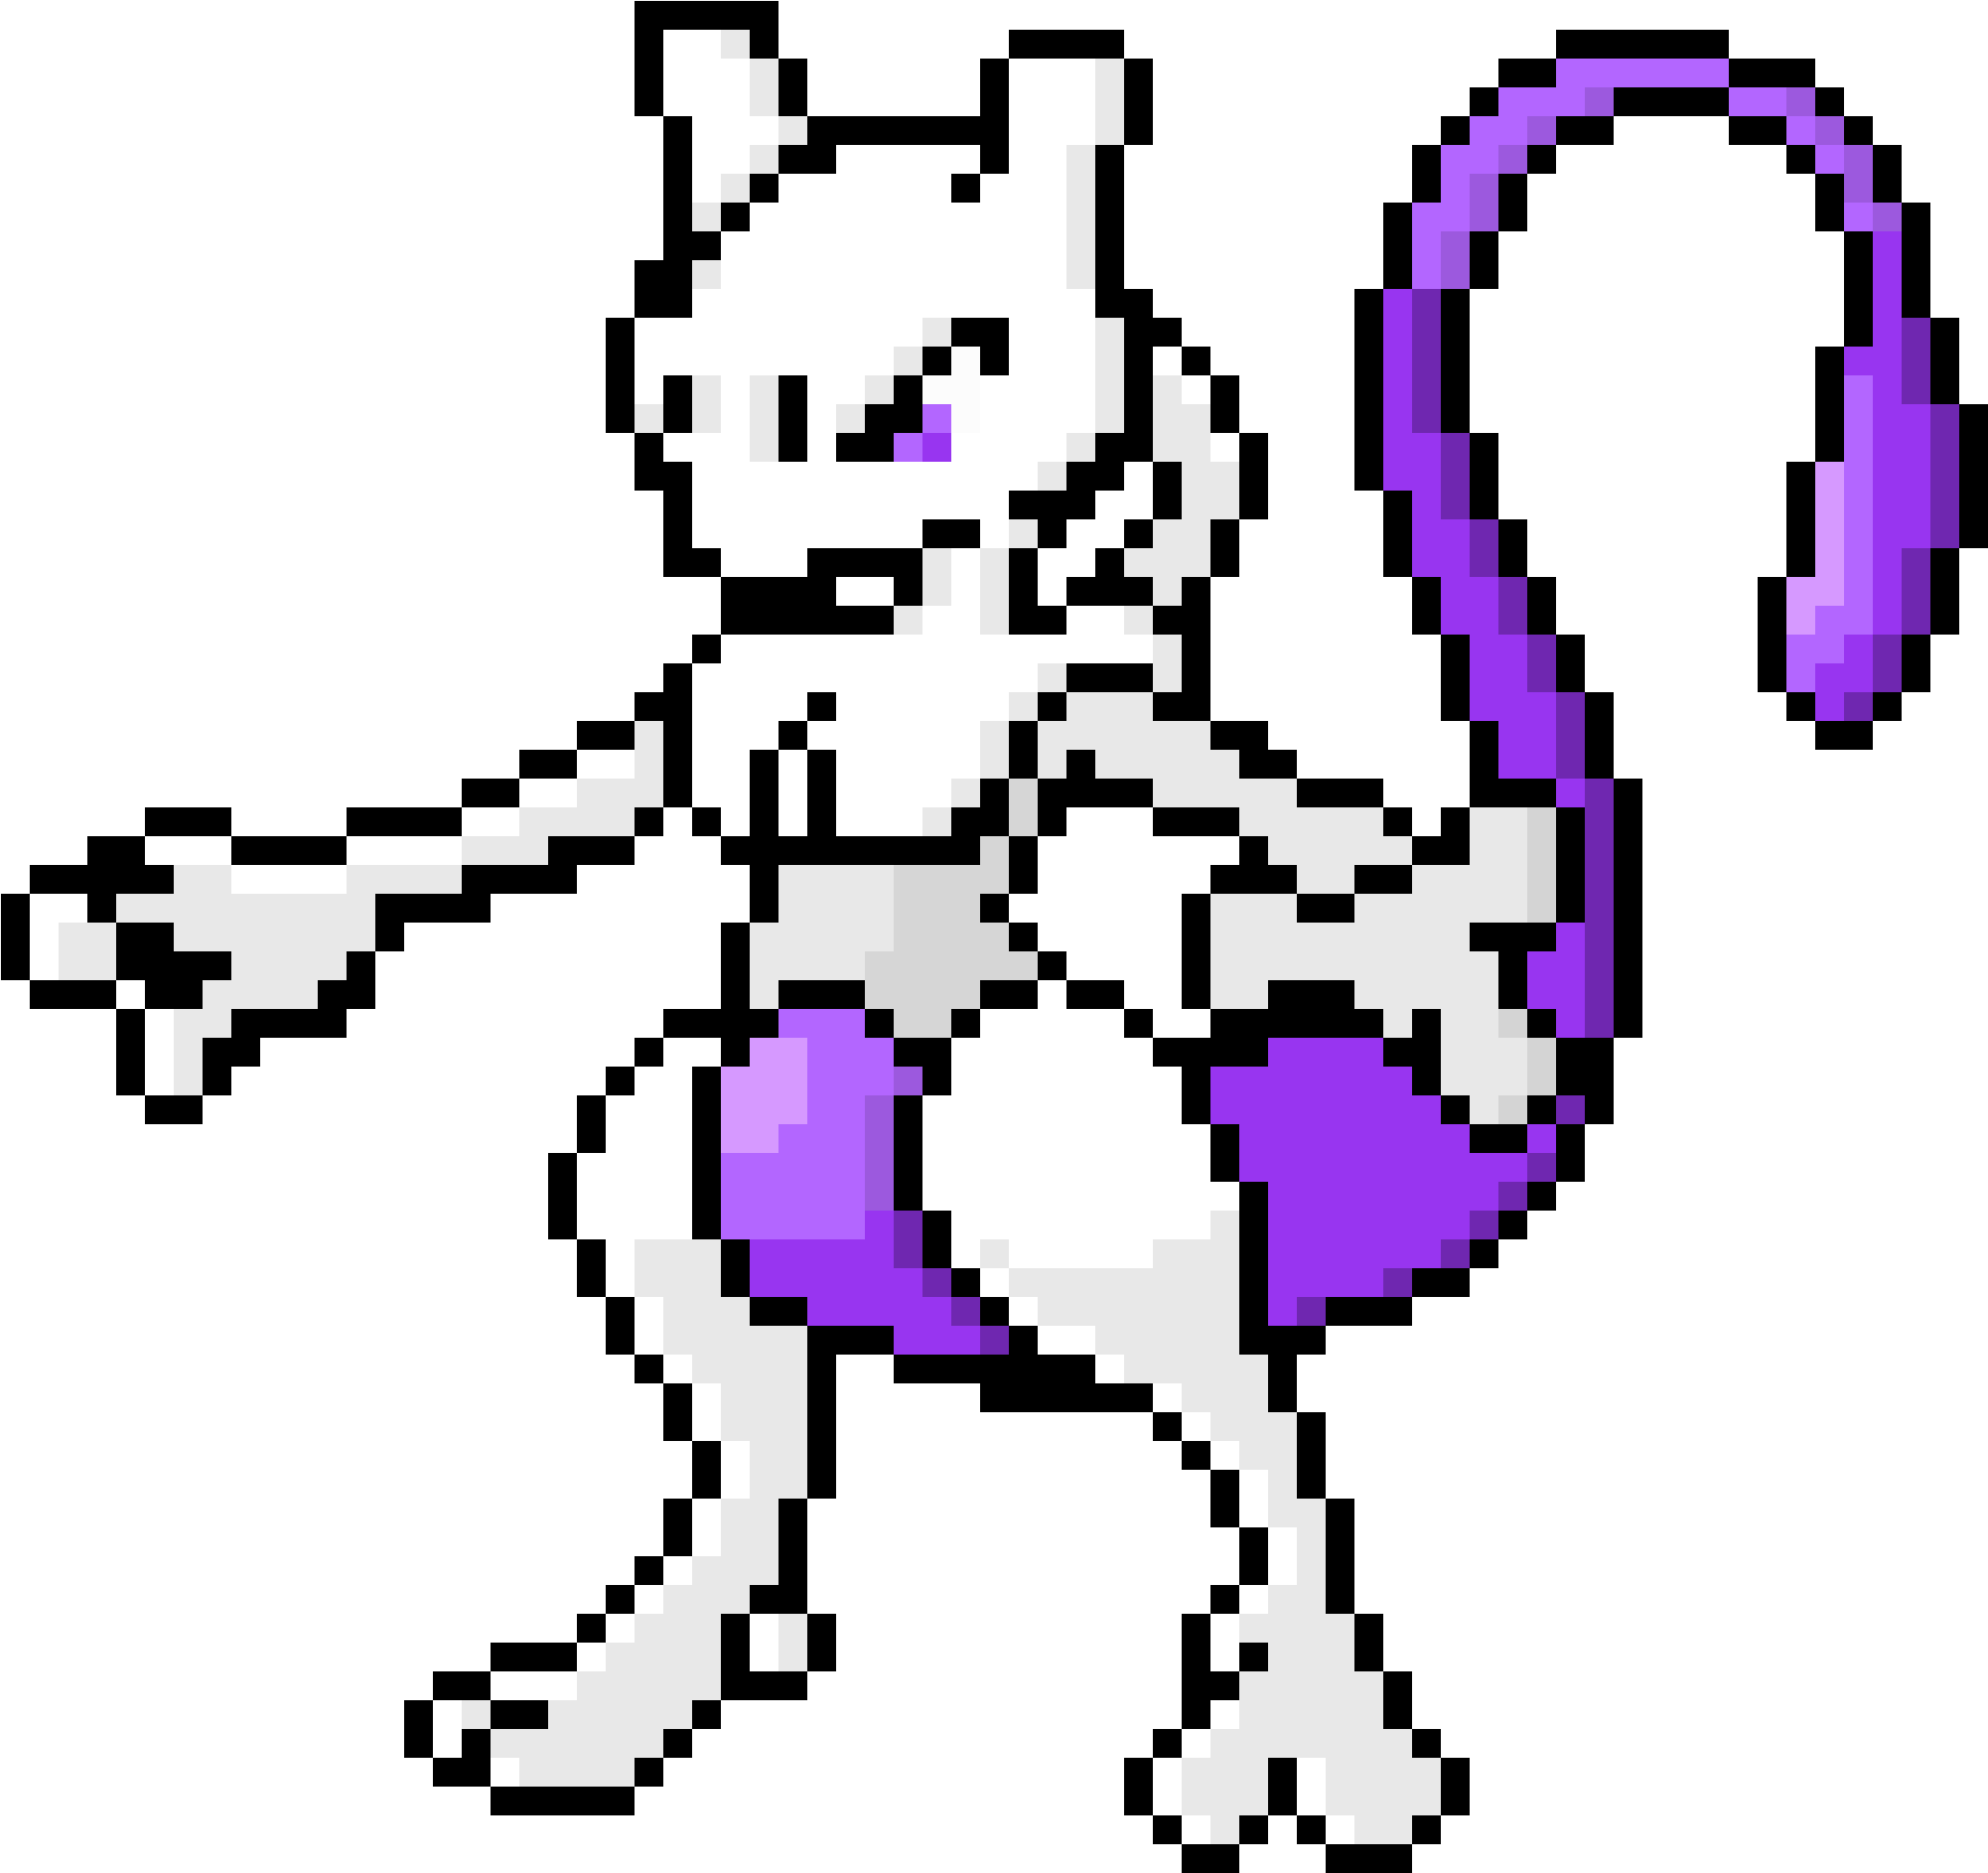 Download Mewtwo - Mewtwo Pixel Art PNG Image with No Backgroud - PNGkey.com...